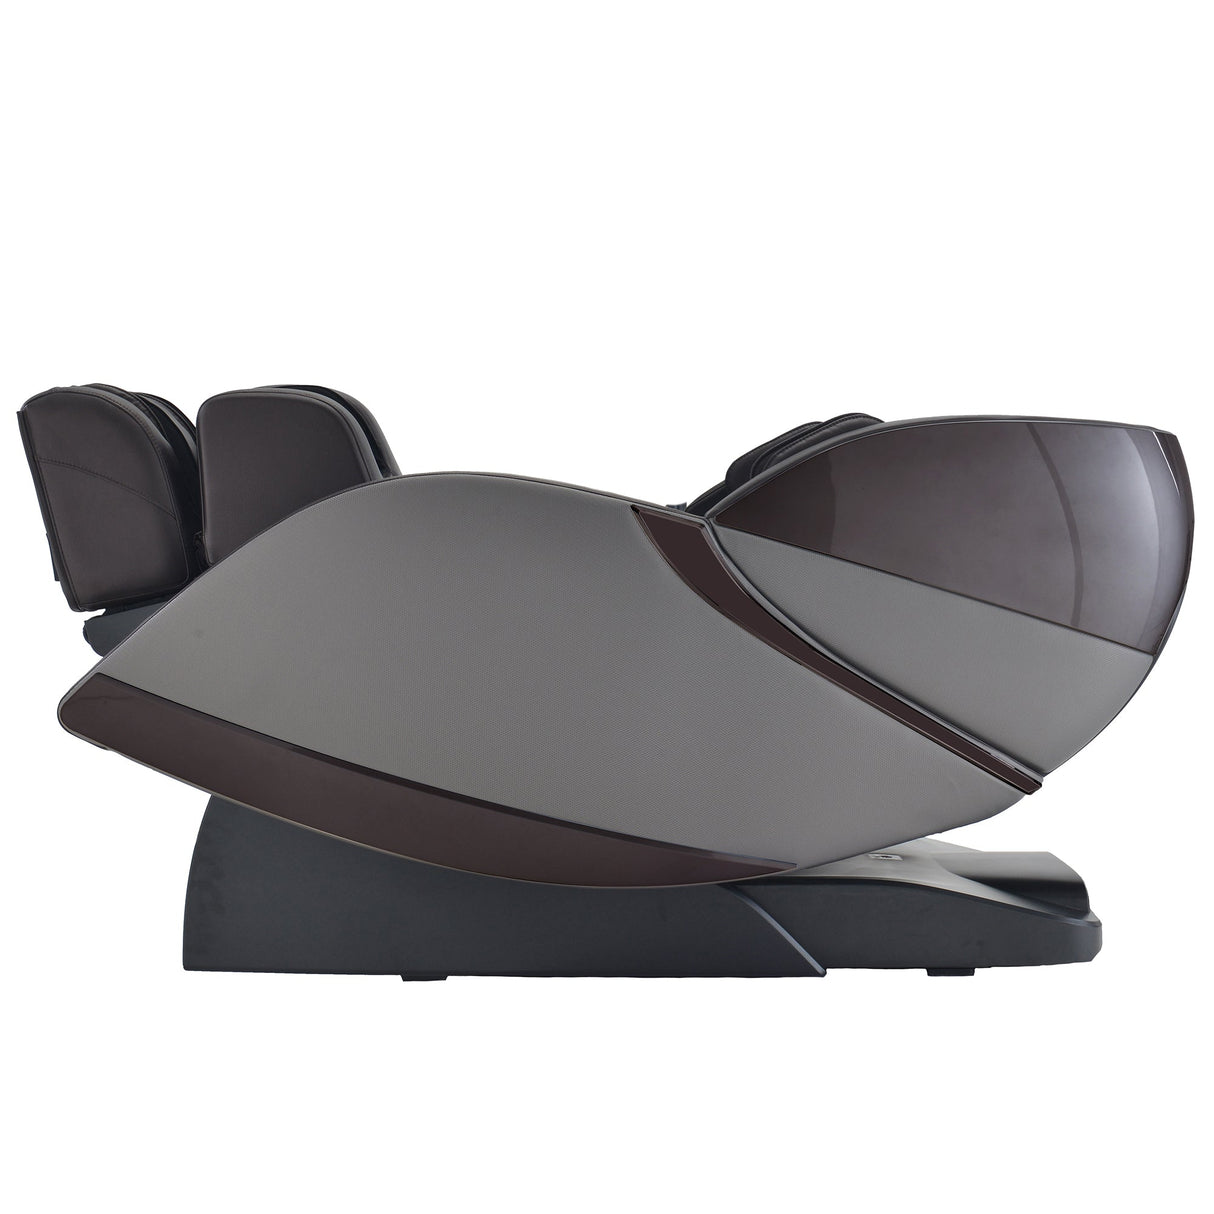 Infinity Evolution Massage Chair Certified Pre-Owned Model | Grade B - Pristine Home & Wellness